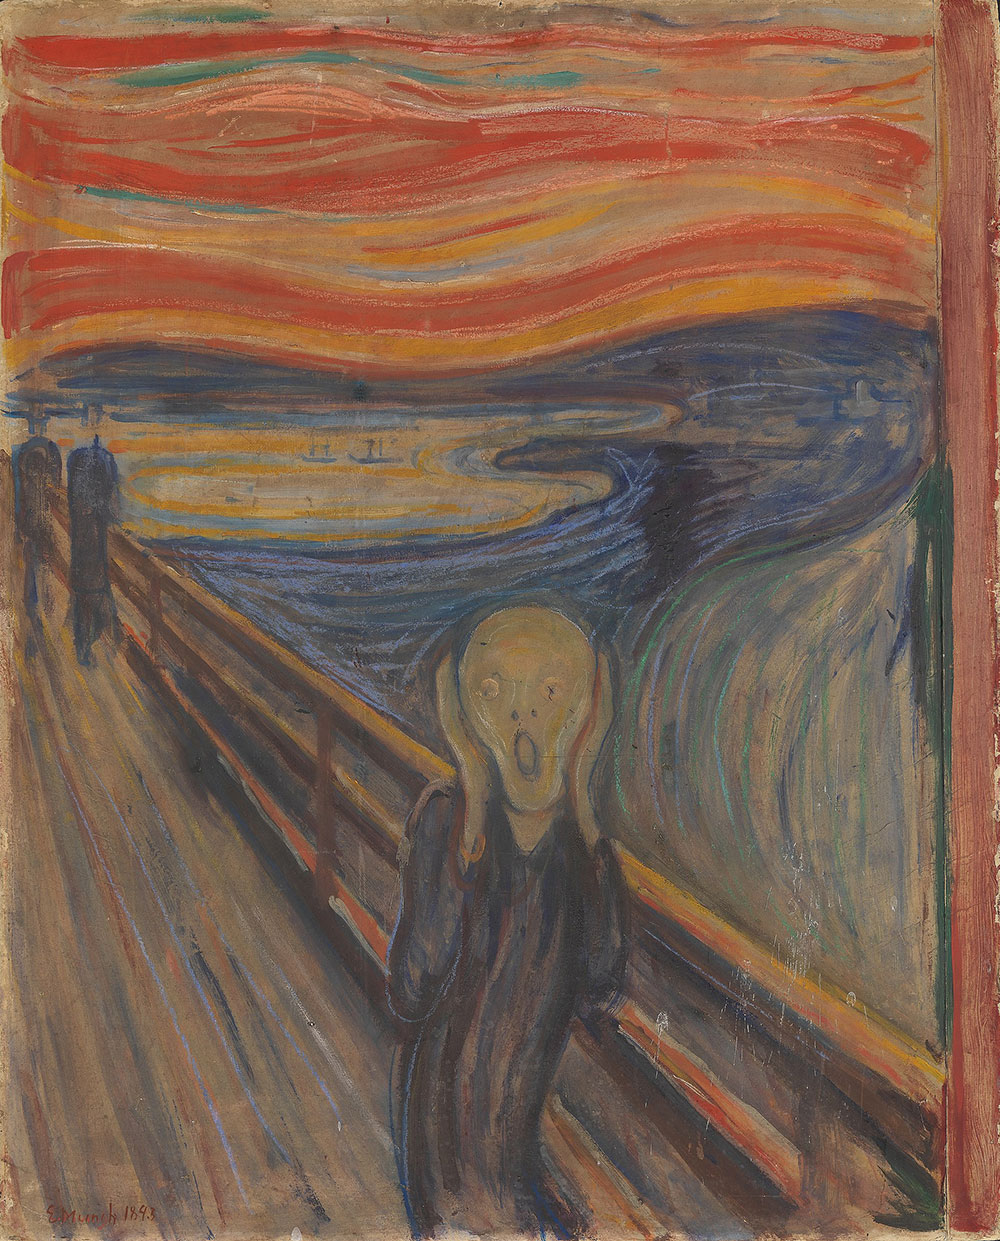 The Scream painting by Edvard Munch